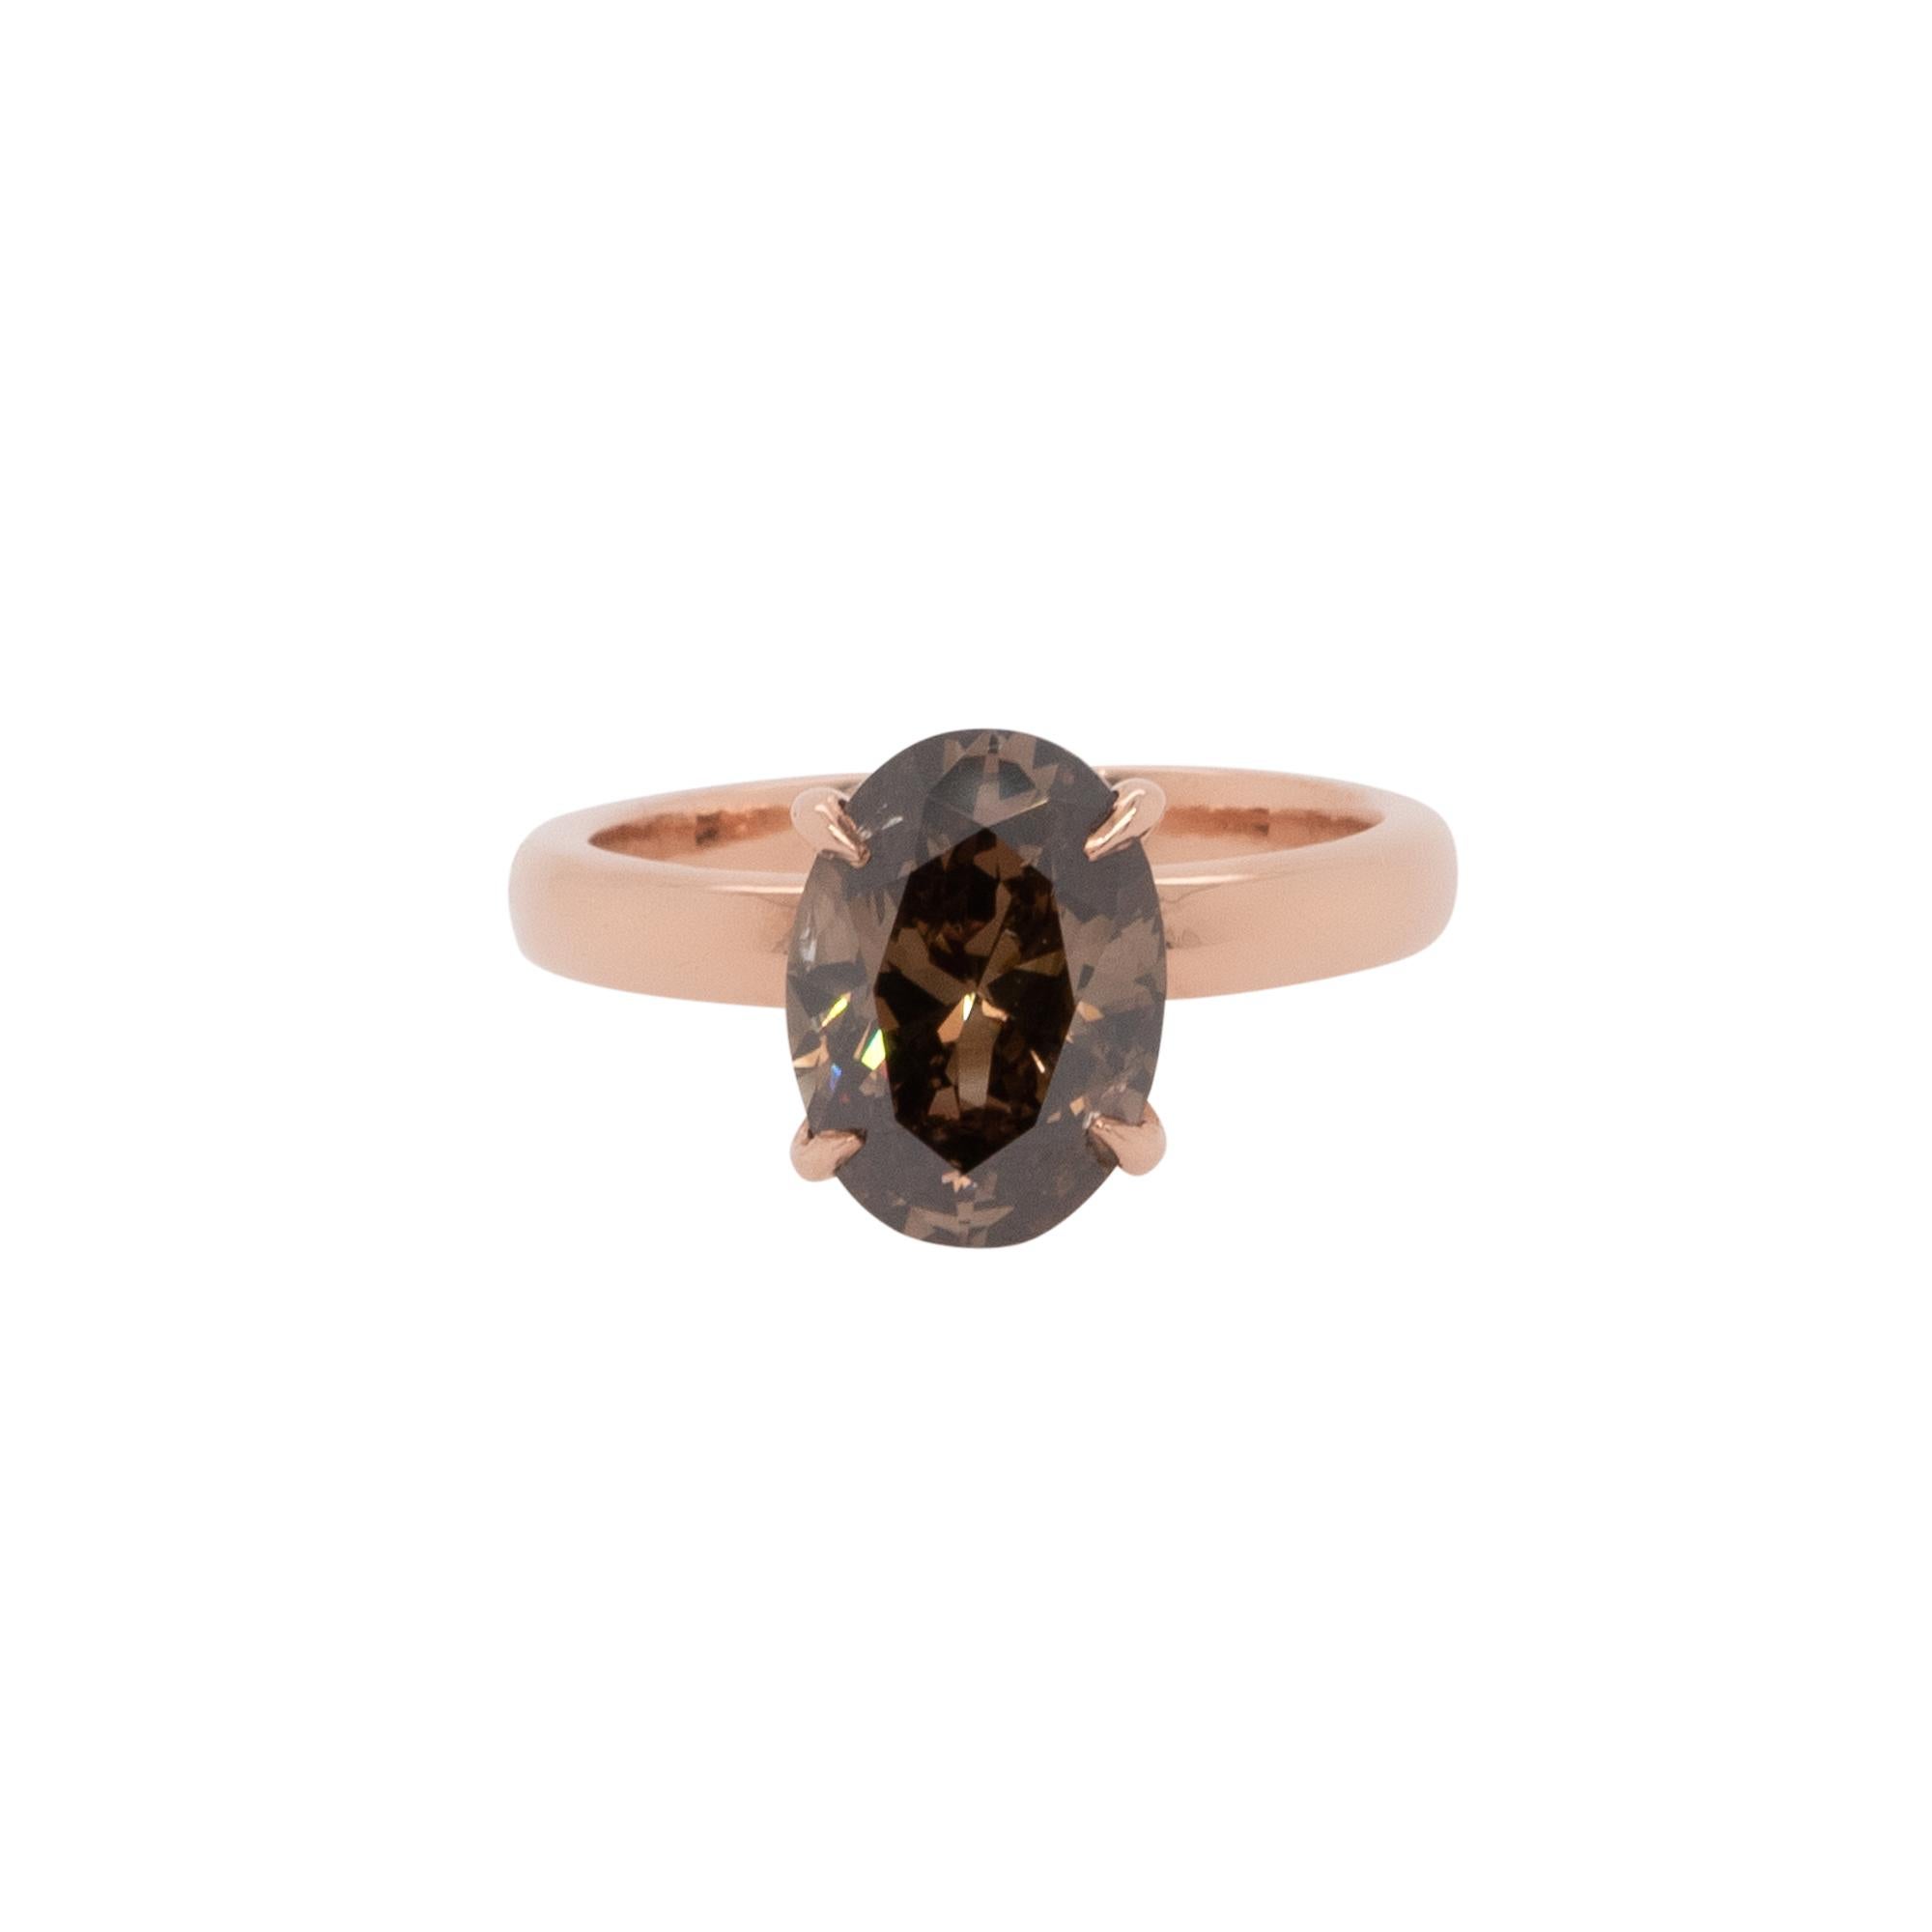 Center Details: 3.30ct Natural Oval Cut Diamond that is Fancy Brown in color and I1 in clarity.

AJI Report # 219-136216L

Ring Material: 14k Rose gold

Ring Details: Rose gold solitaire smooth mounting

Ring Measurements: 20mm x 11mm x 28mm

Ring